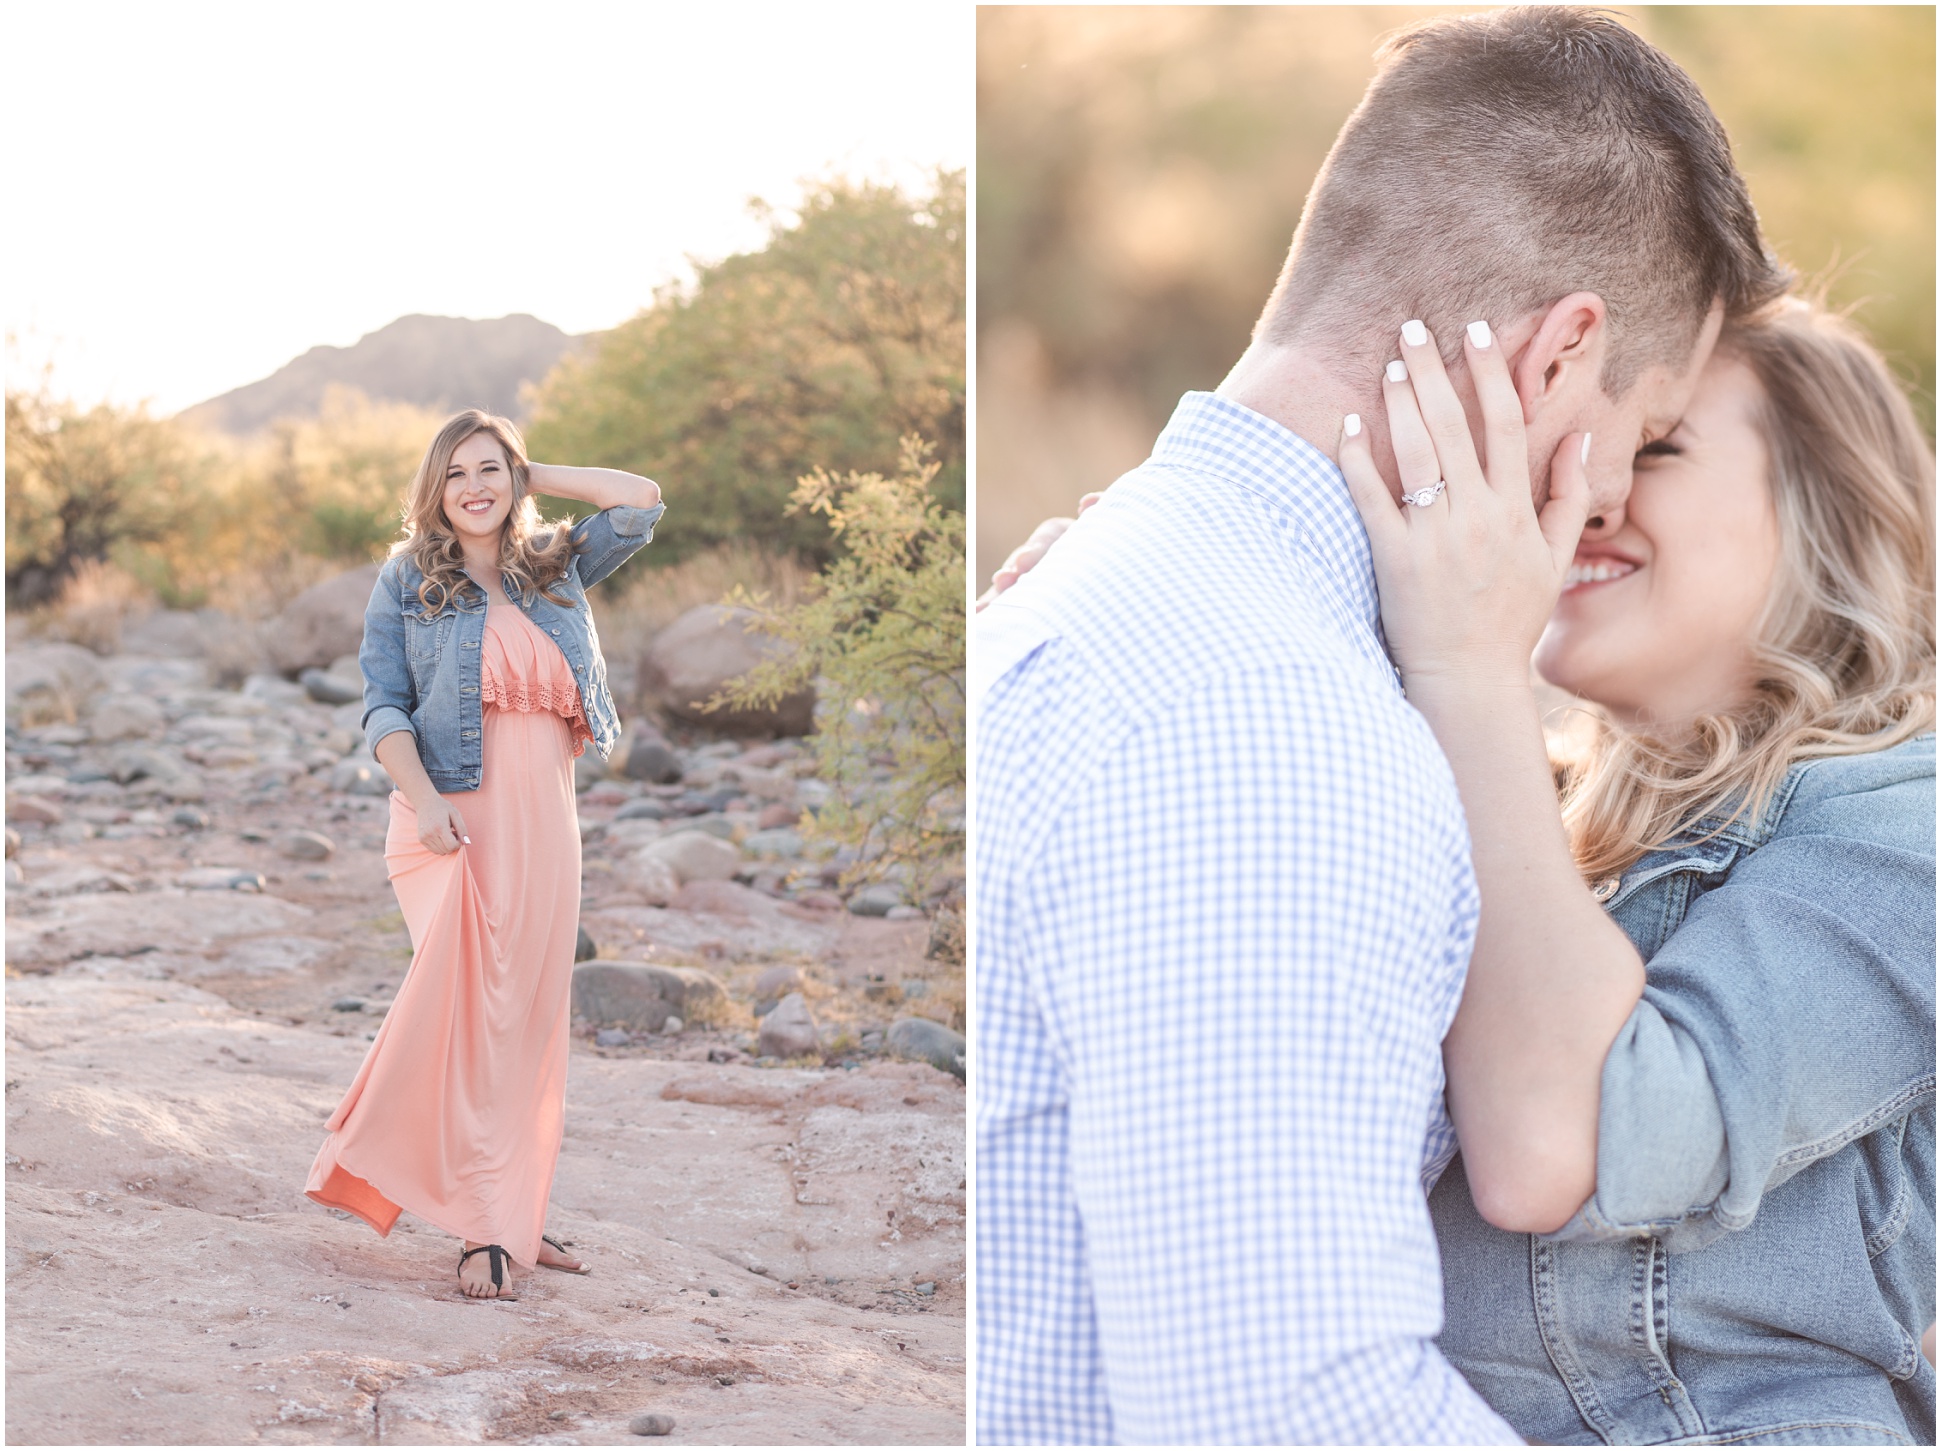 Left: Taylor wearing flowing dress and jean jacket for an individual portrait, Right: Taylor and Matt kissing while her engagement bling shines